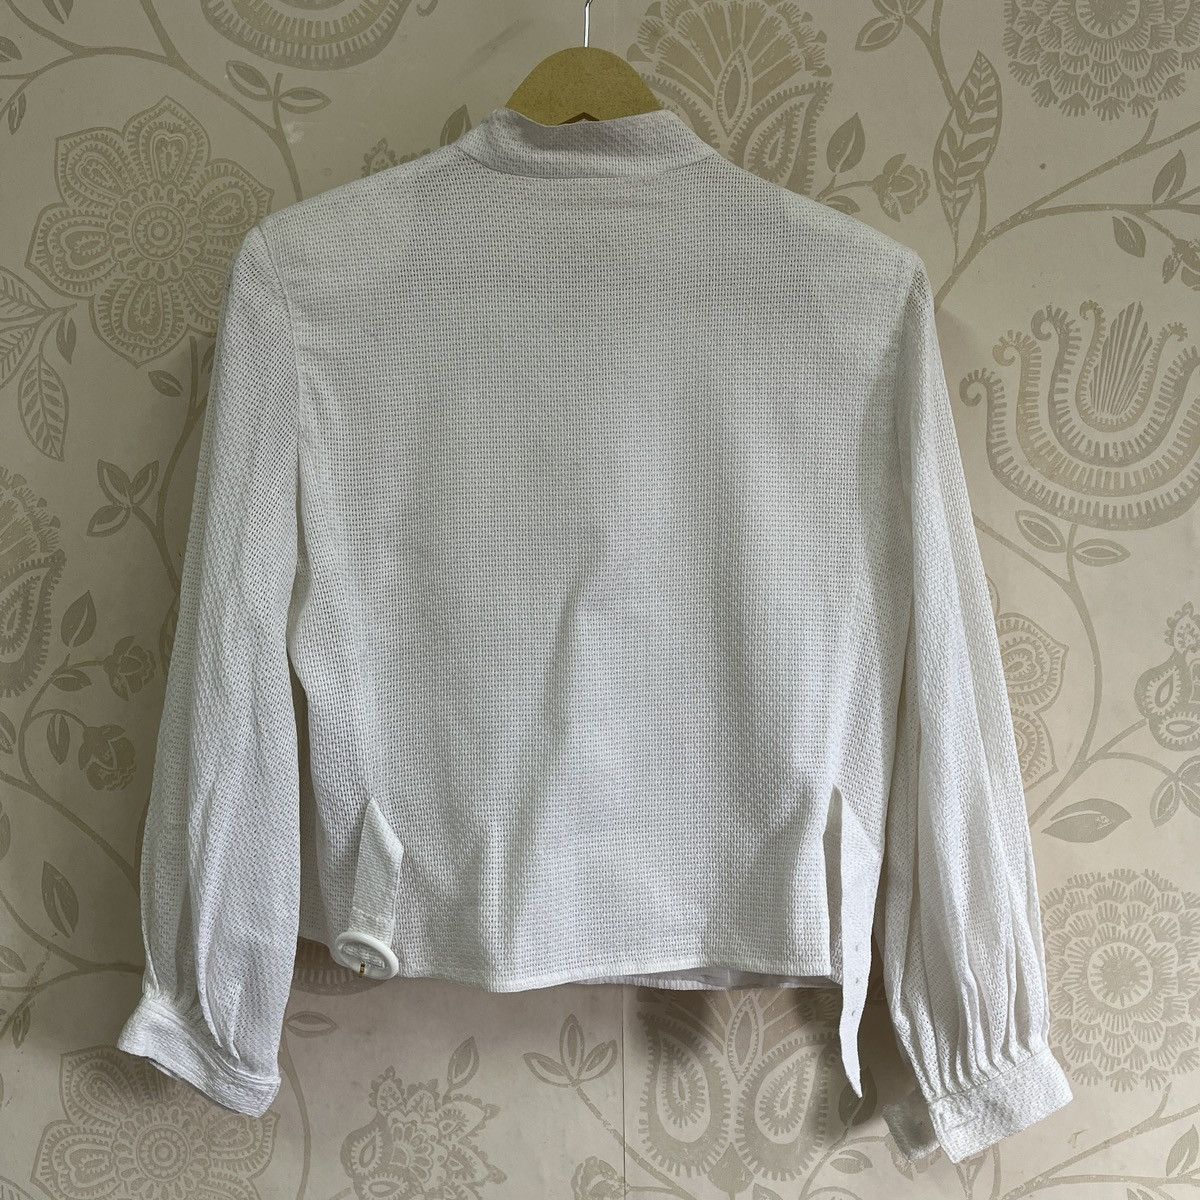 Gently Used Vintage Christian Dior Blouse Size M - 2